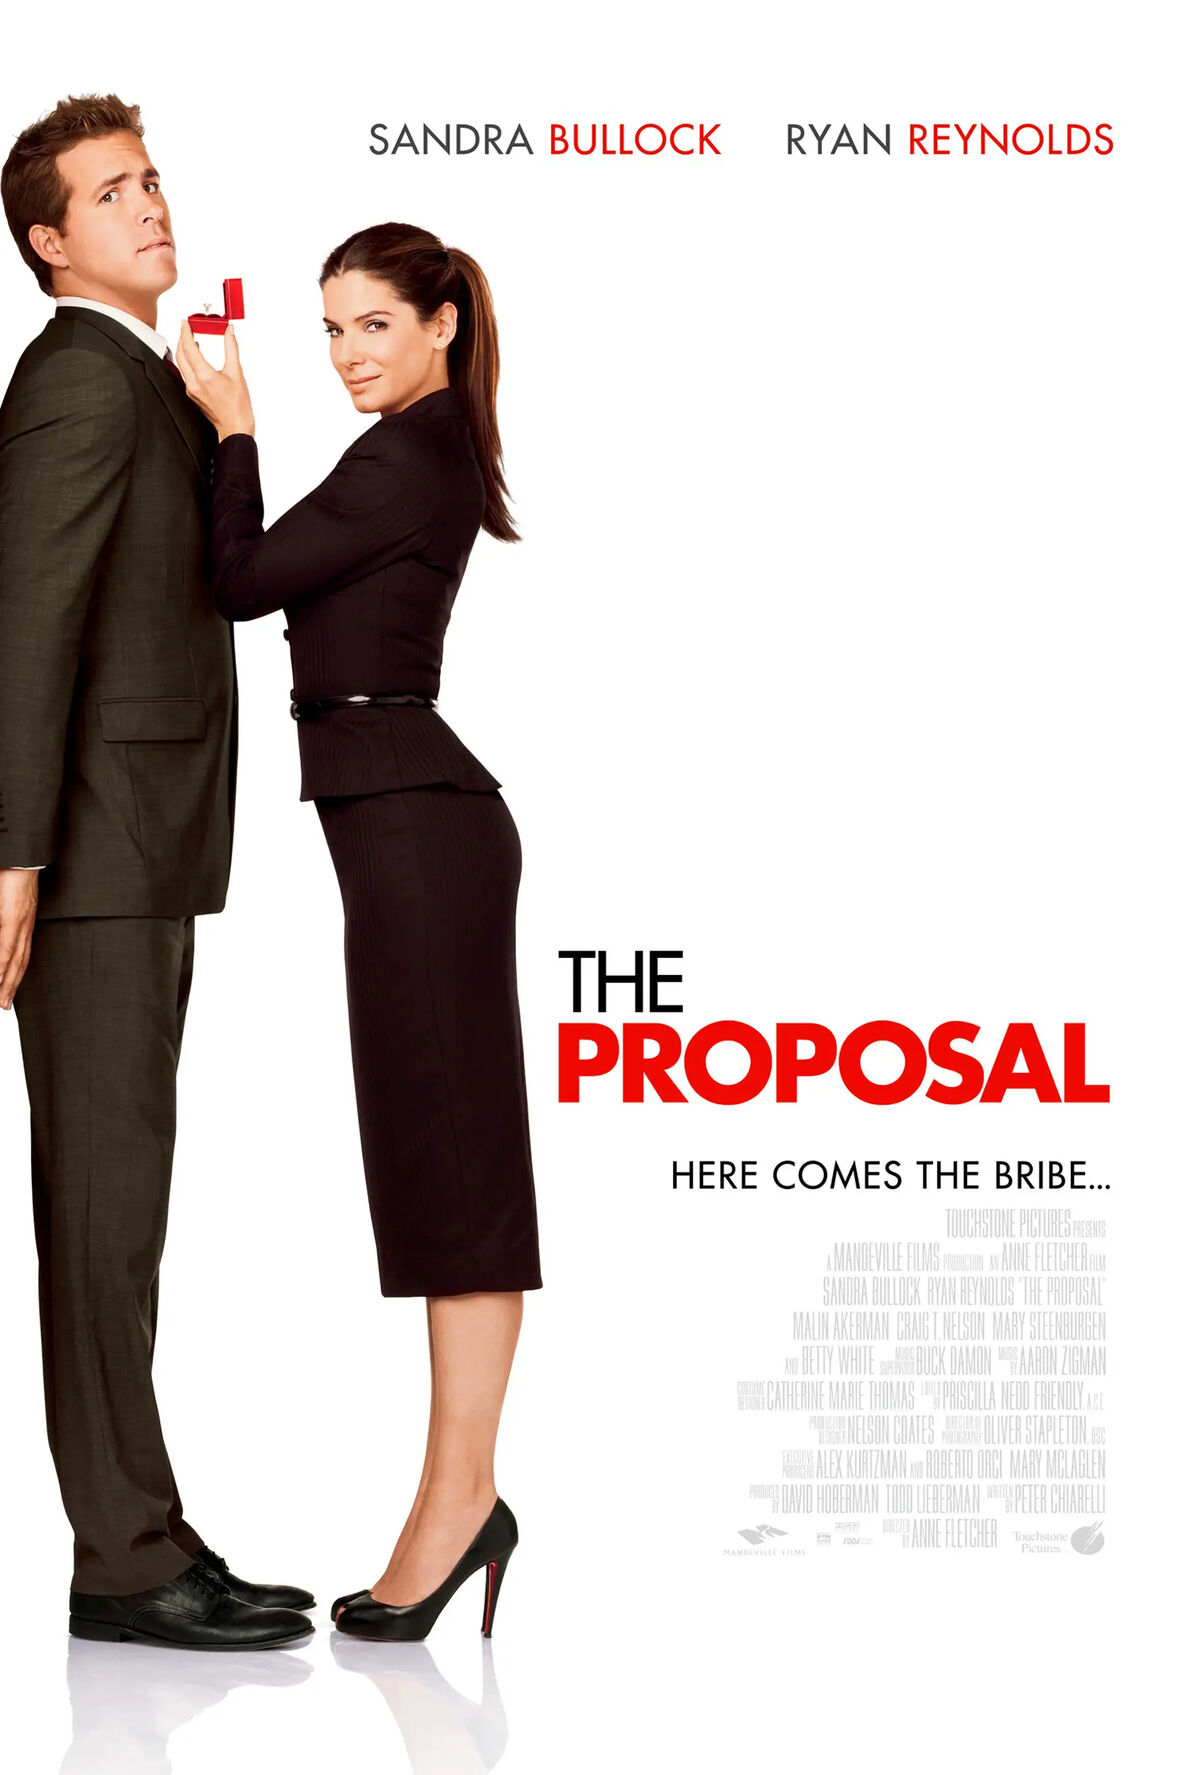 https://static.wikia.nocookie.net/disney/images/0/02/The_Proposal.jpg/revision/latest/scale-to-width-down/1200?cb=20230619103011